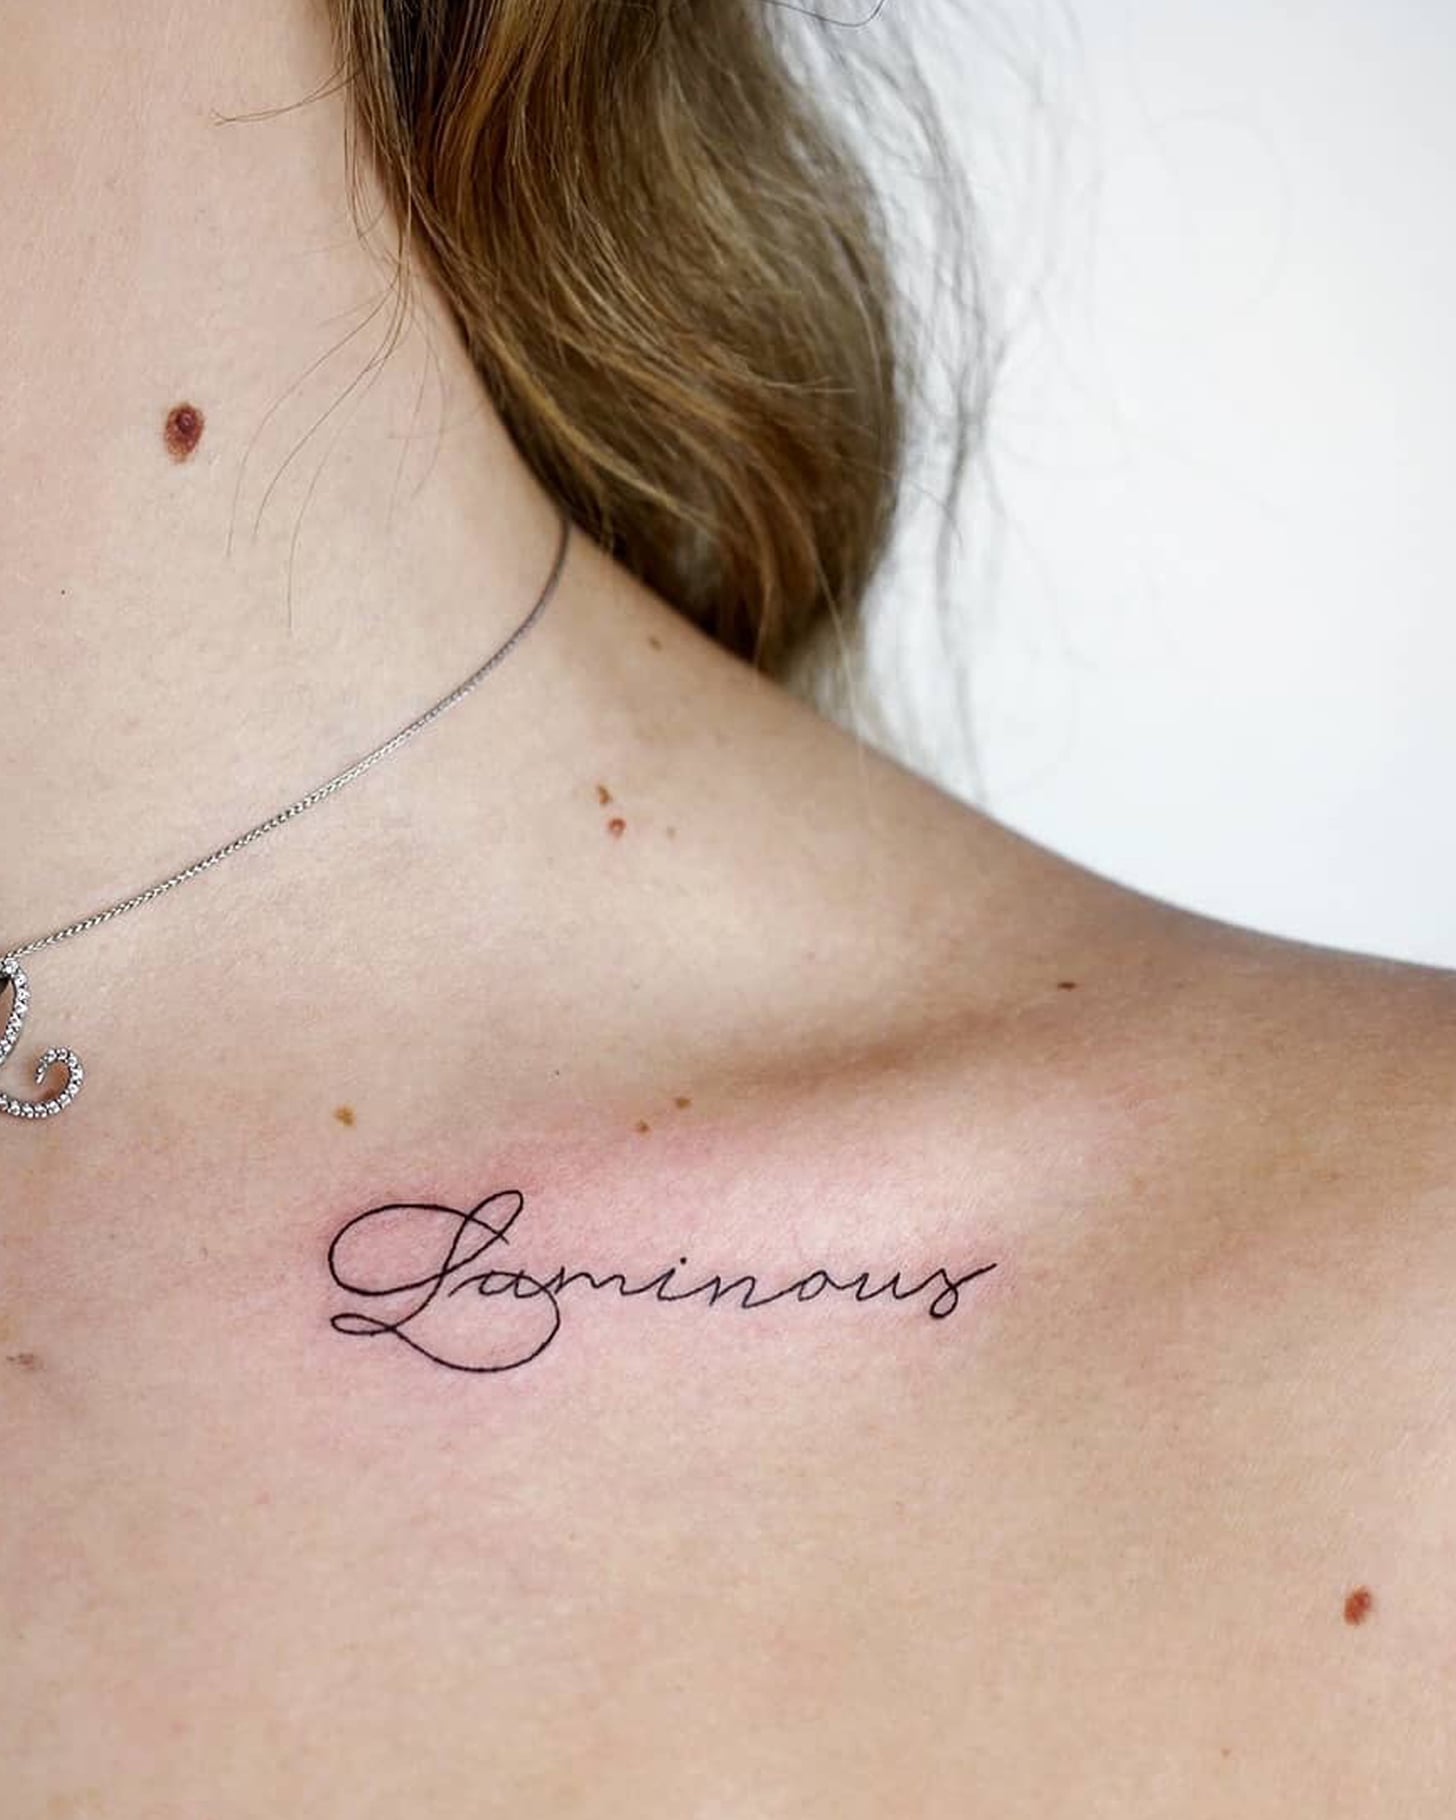 badass tattoo quotes for girls